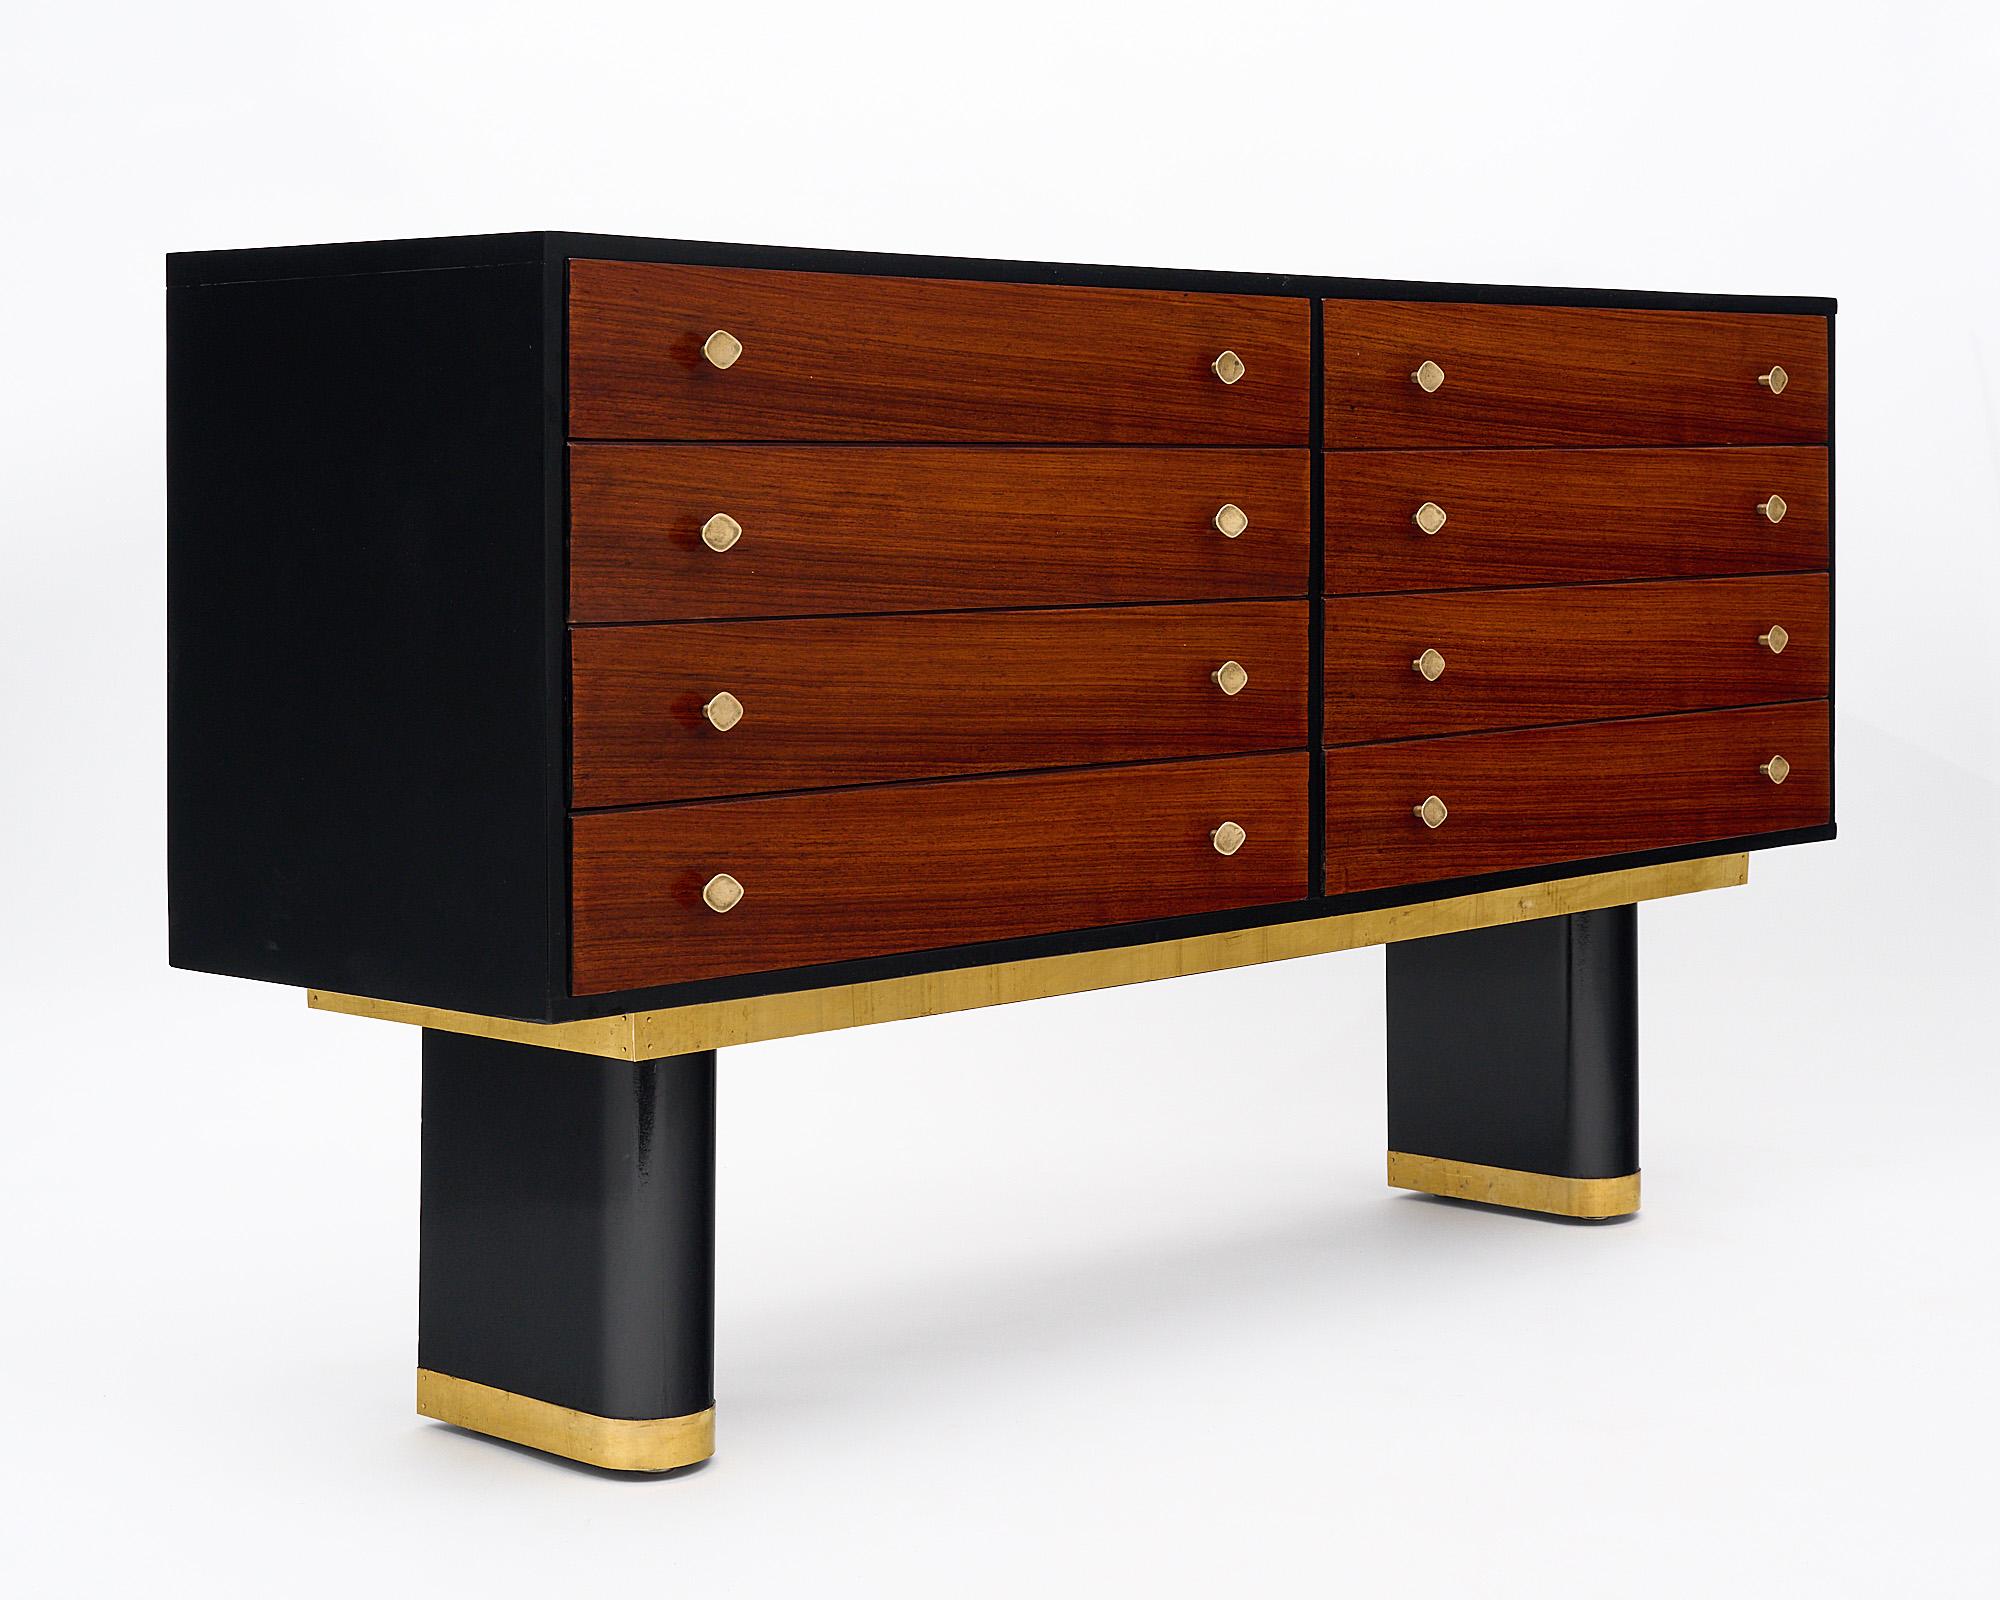 Chest of drawers, French, in the manner of Jean-Charles Moreux. This architectural chest features eight dovetailed drawers with their original bronze pulls and sits on two wooden oblong legs that have been ebonized and trimmed in brass. The sides